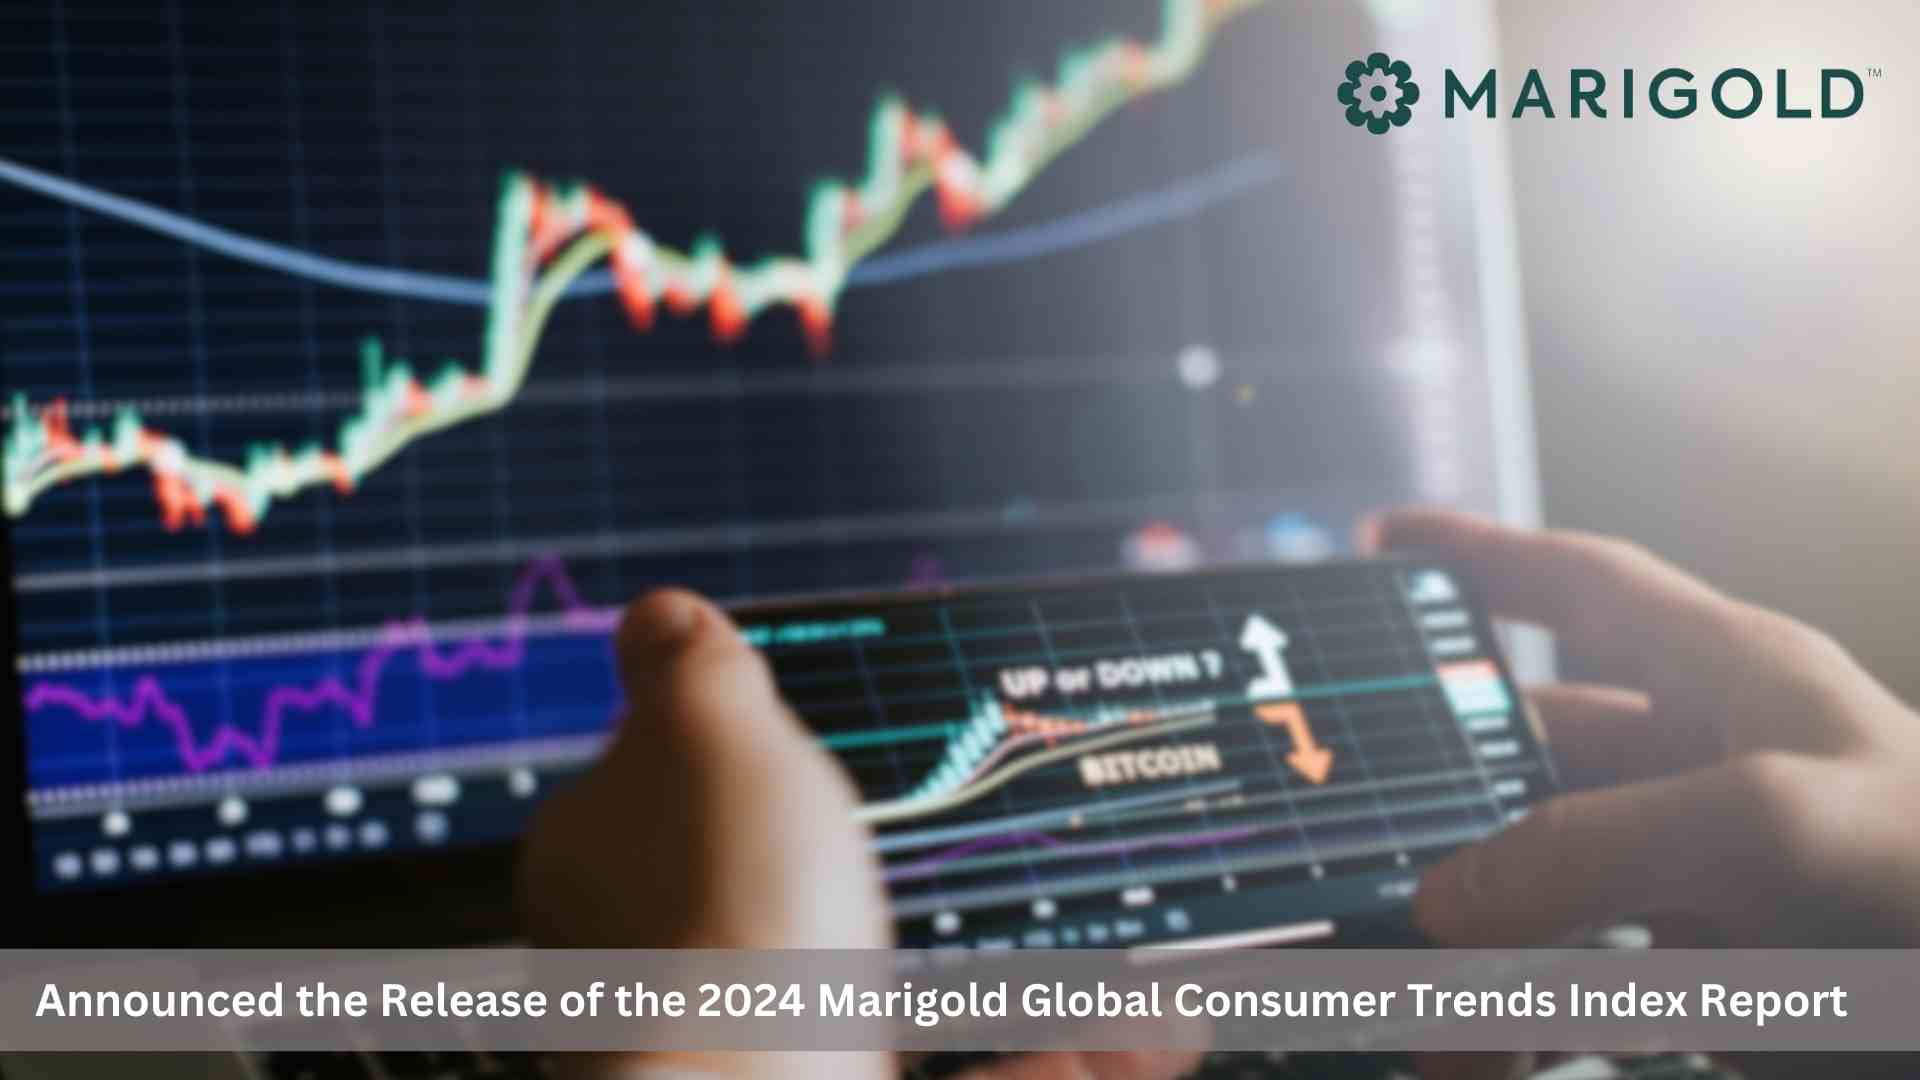 Annual Marigold™ Global Consumer Trends Index Reveals Need for Brands to Deliver on Data Privacy and Personalization to Win Customer Loyalty